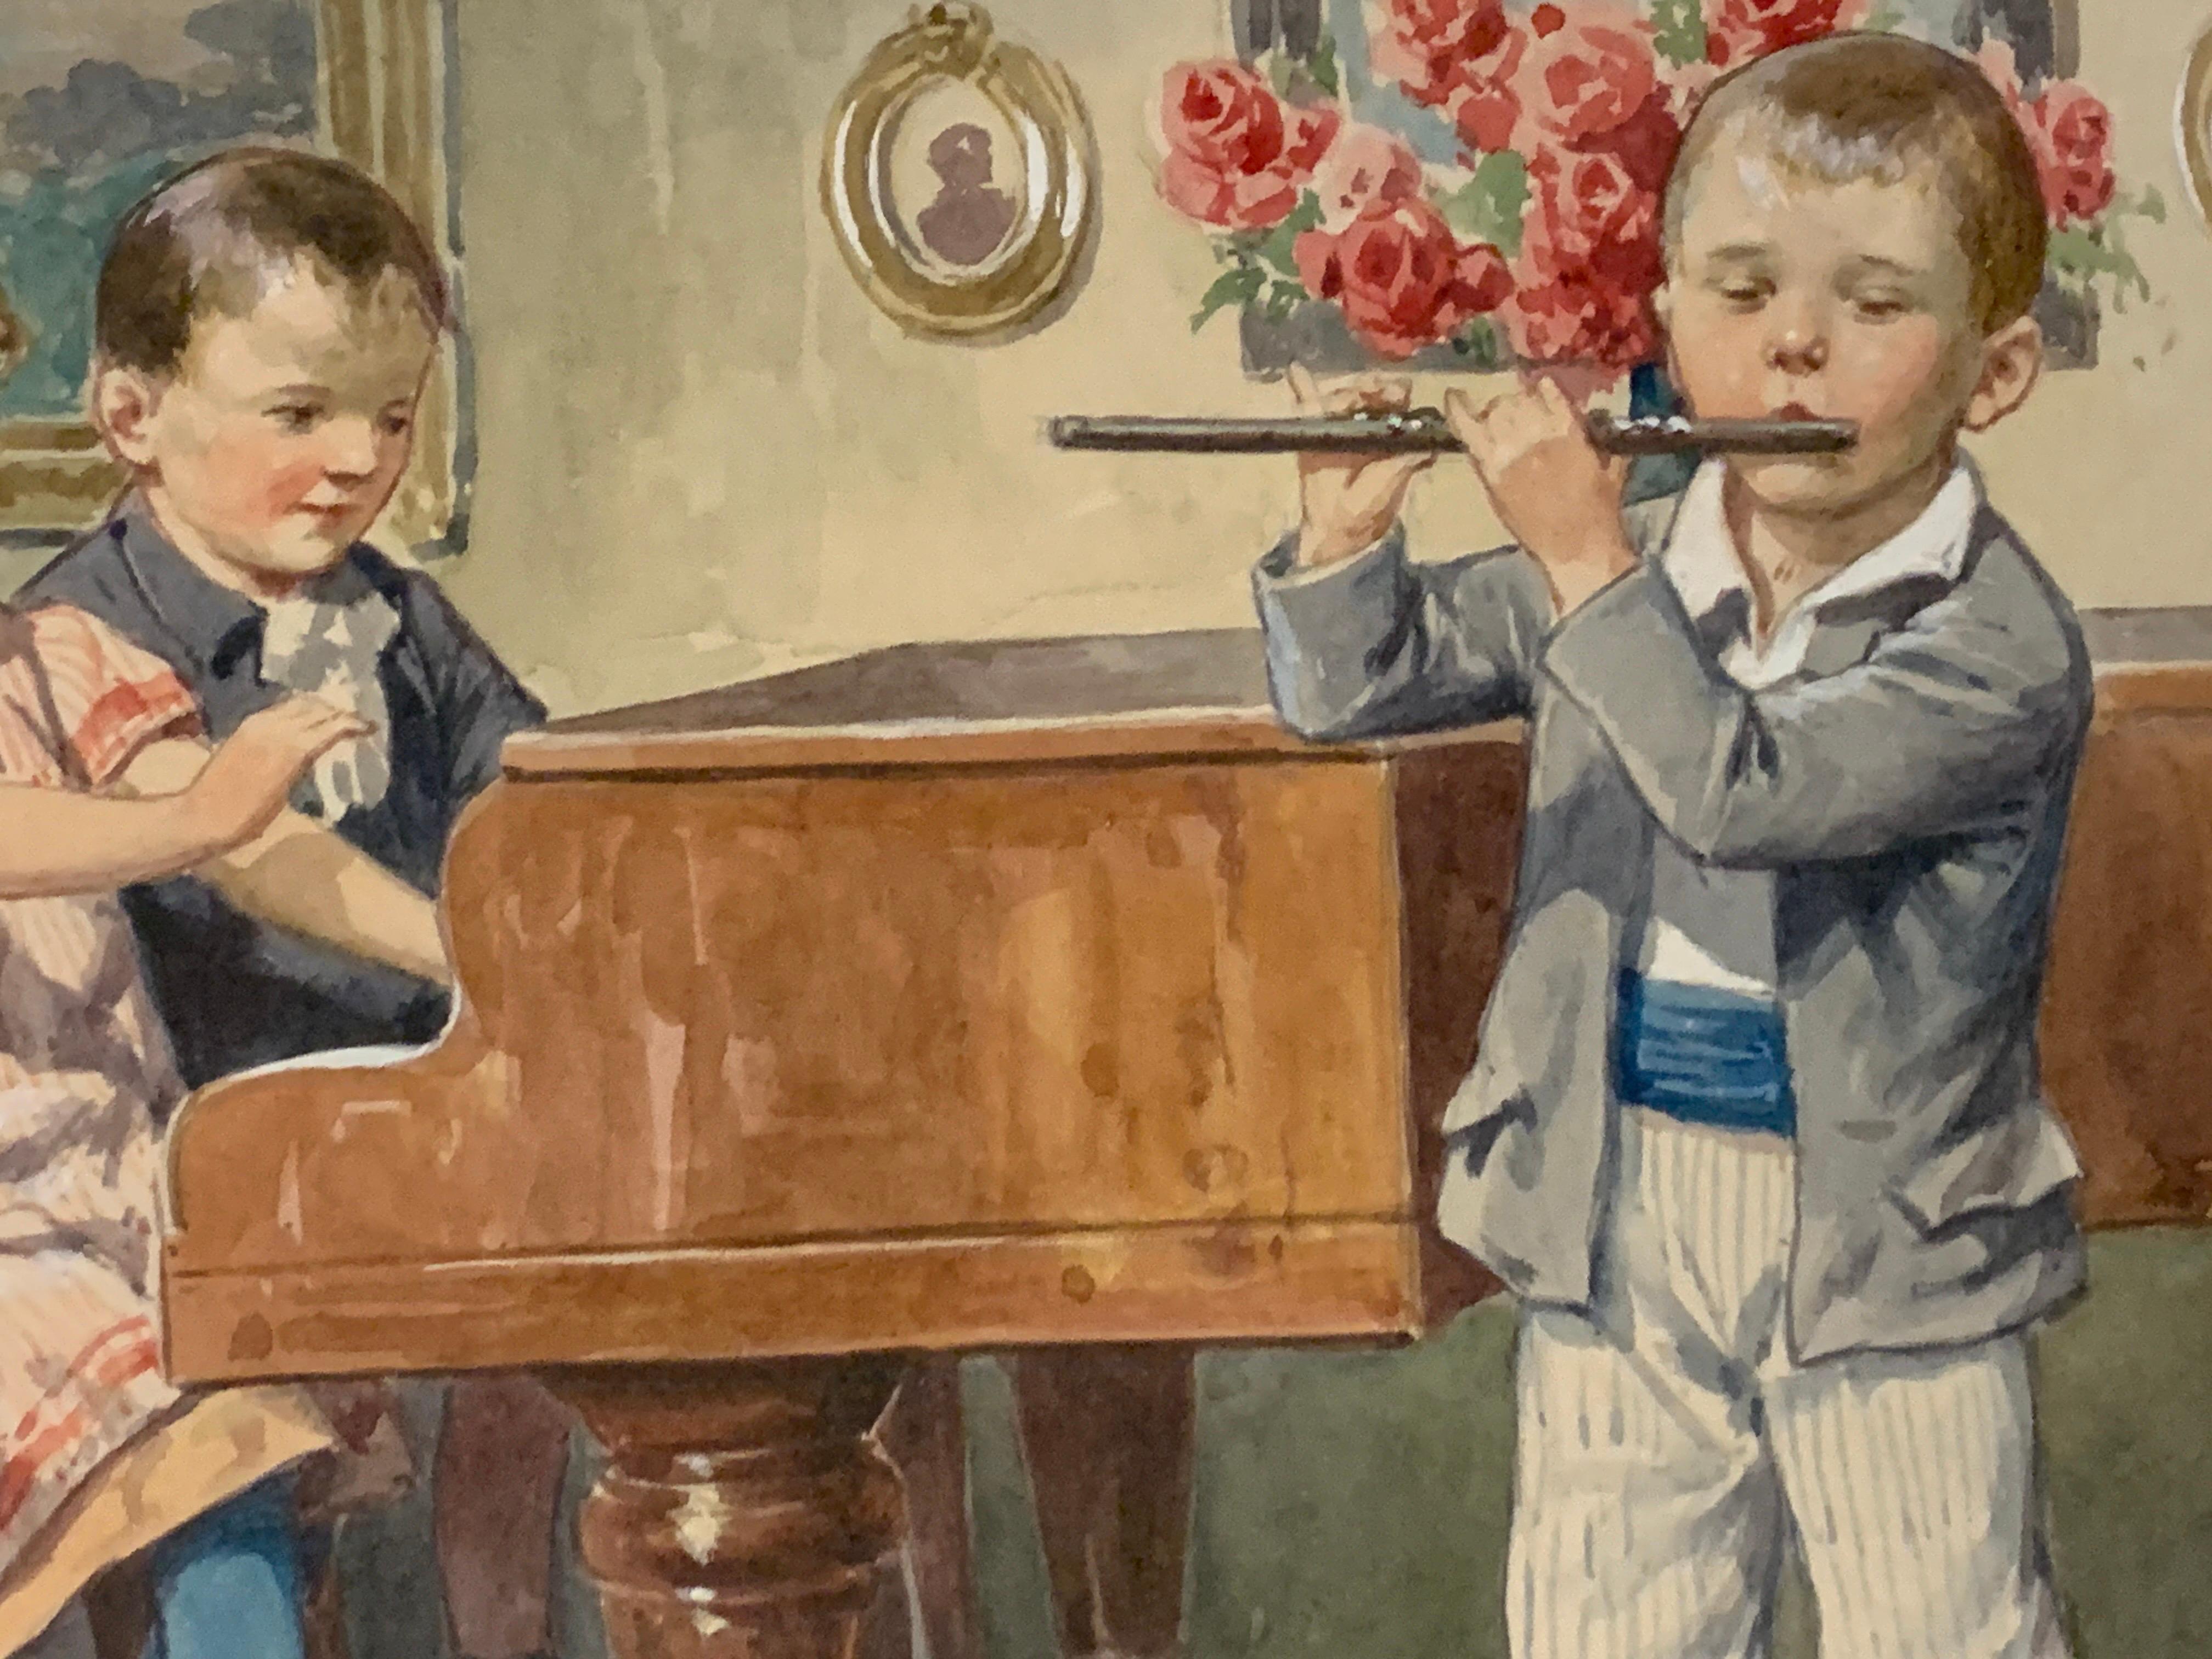 Early 20th century German or Austrian children playing a piano and flute - Victorian Art by Karl Feiertag